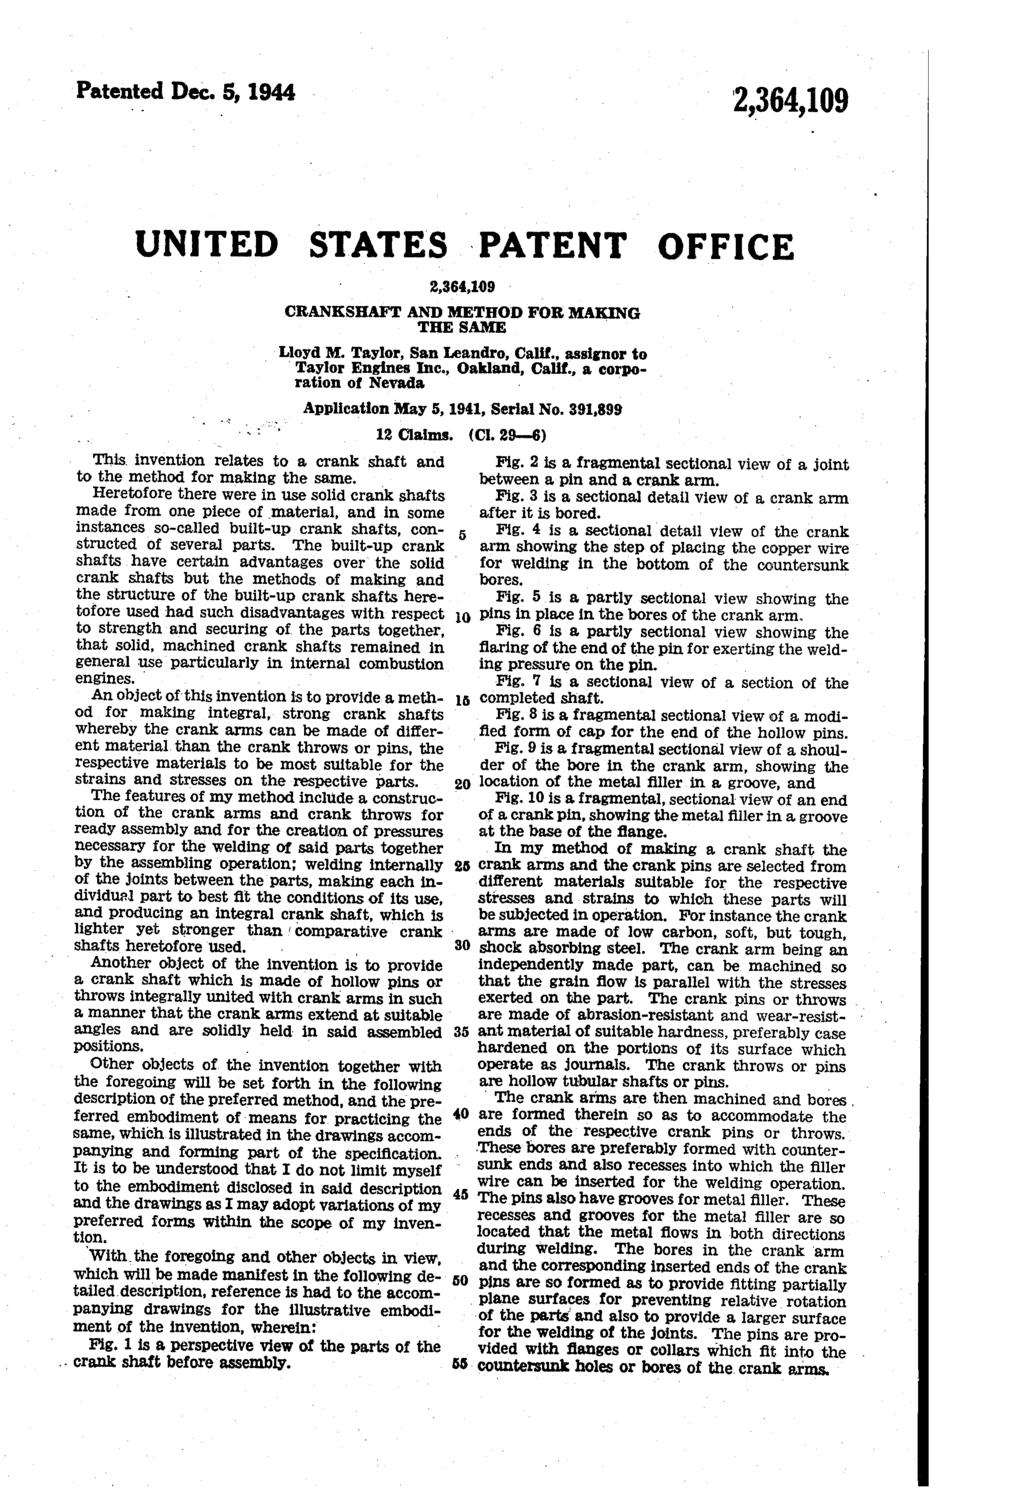 Patented Dec. 5, 1944 UNITED STATES PATENT OFFICE CRANKSEAFT AND METHOD FoR MAKING THE SAME Lloyd M. Taylor, San Leandro, Calif., assignor to Taylor Engines Inc., Oakland, Calif.